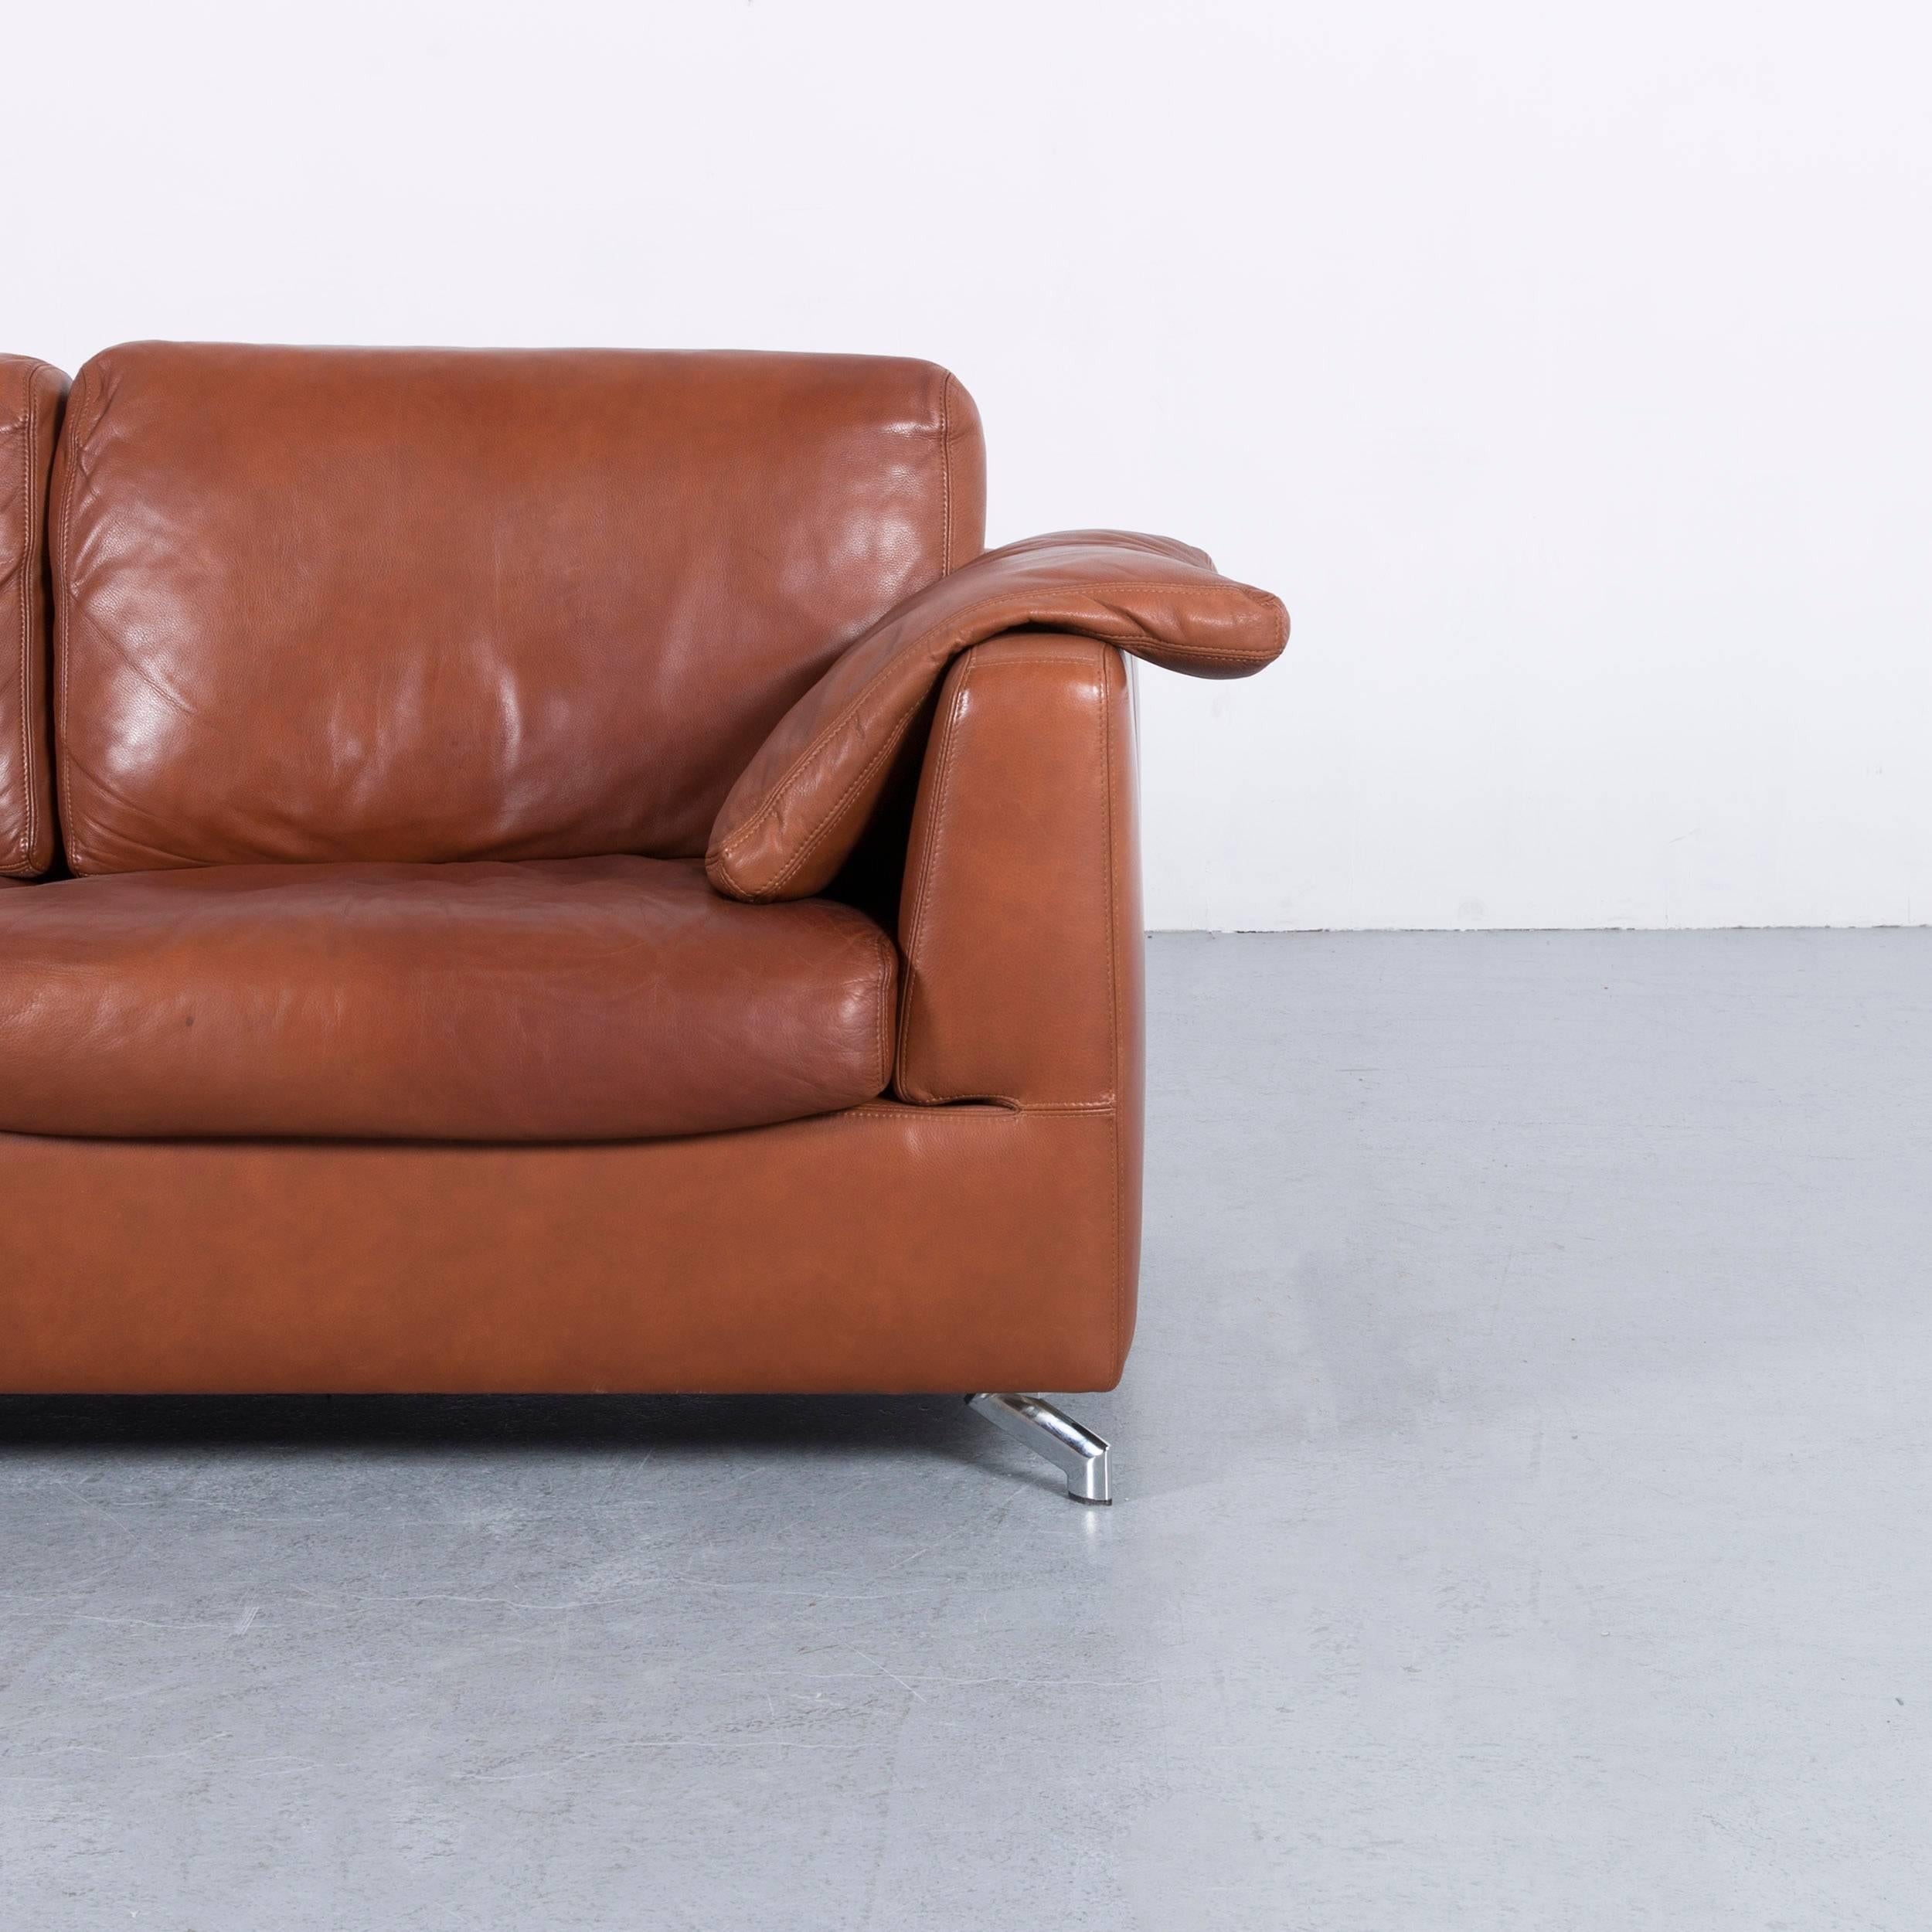 German Machalke Designer Leather Sofa Brown Two-Seat Couch